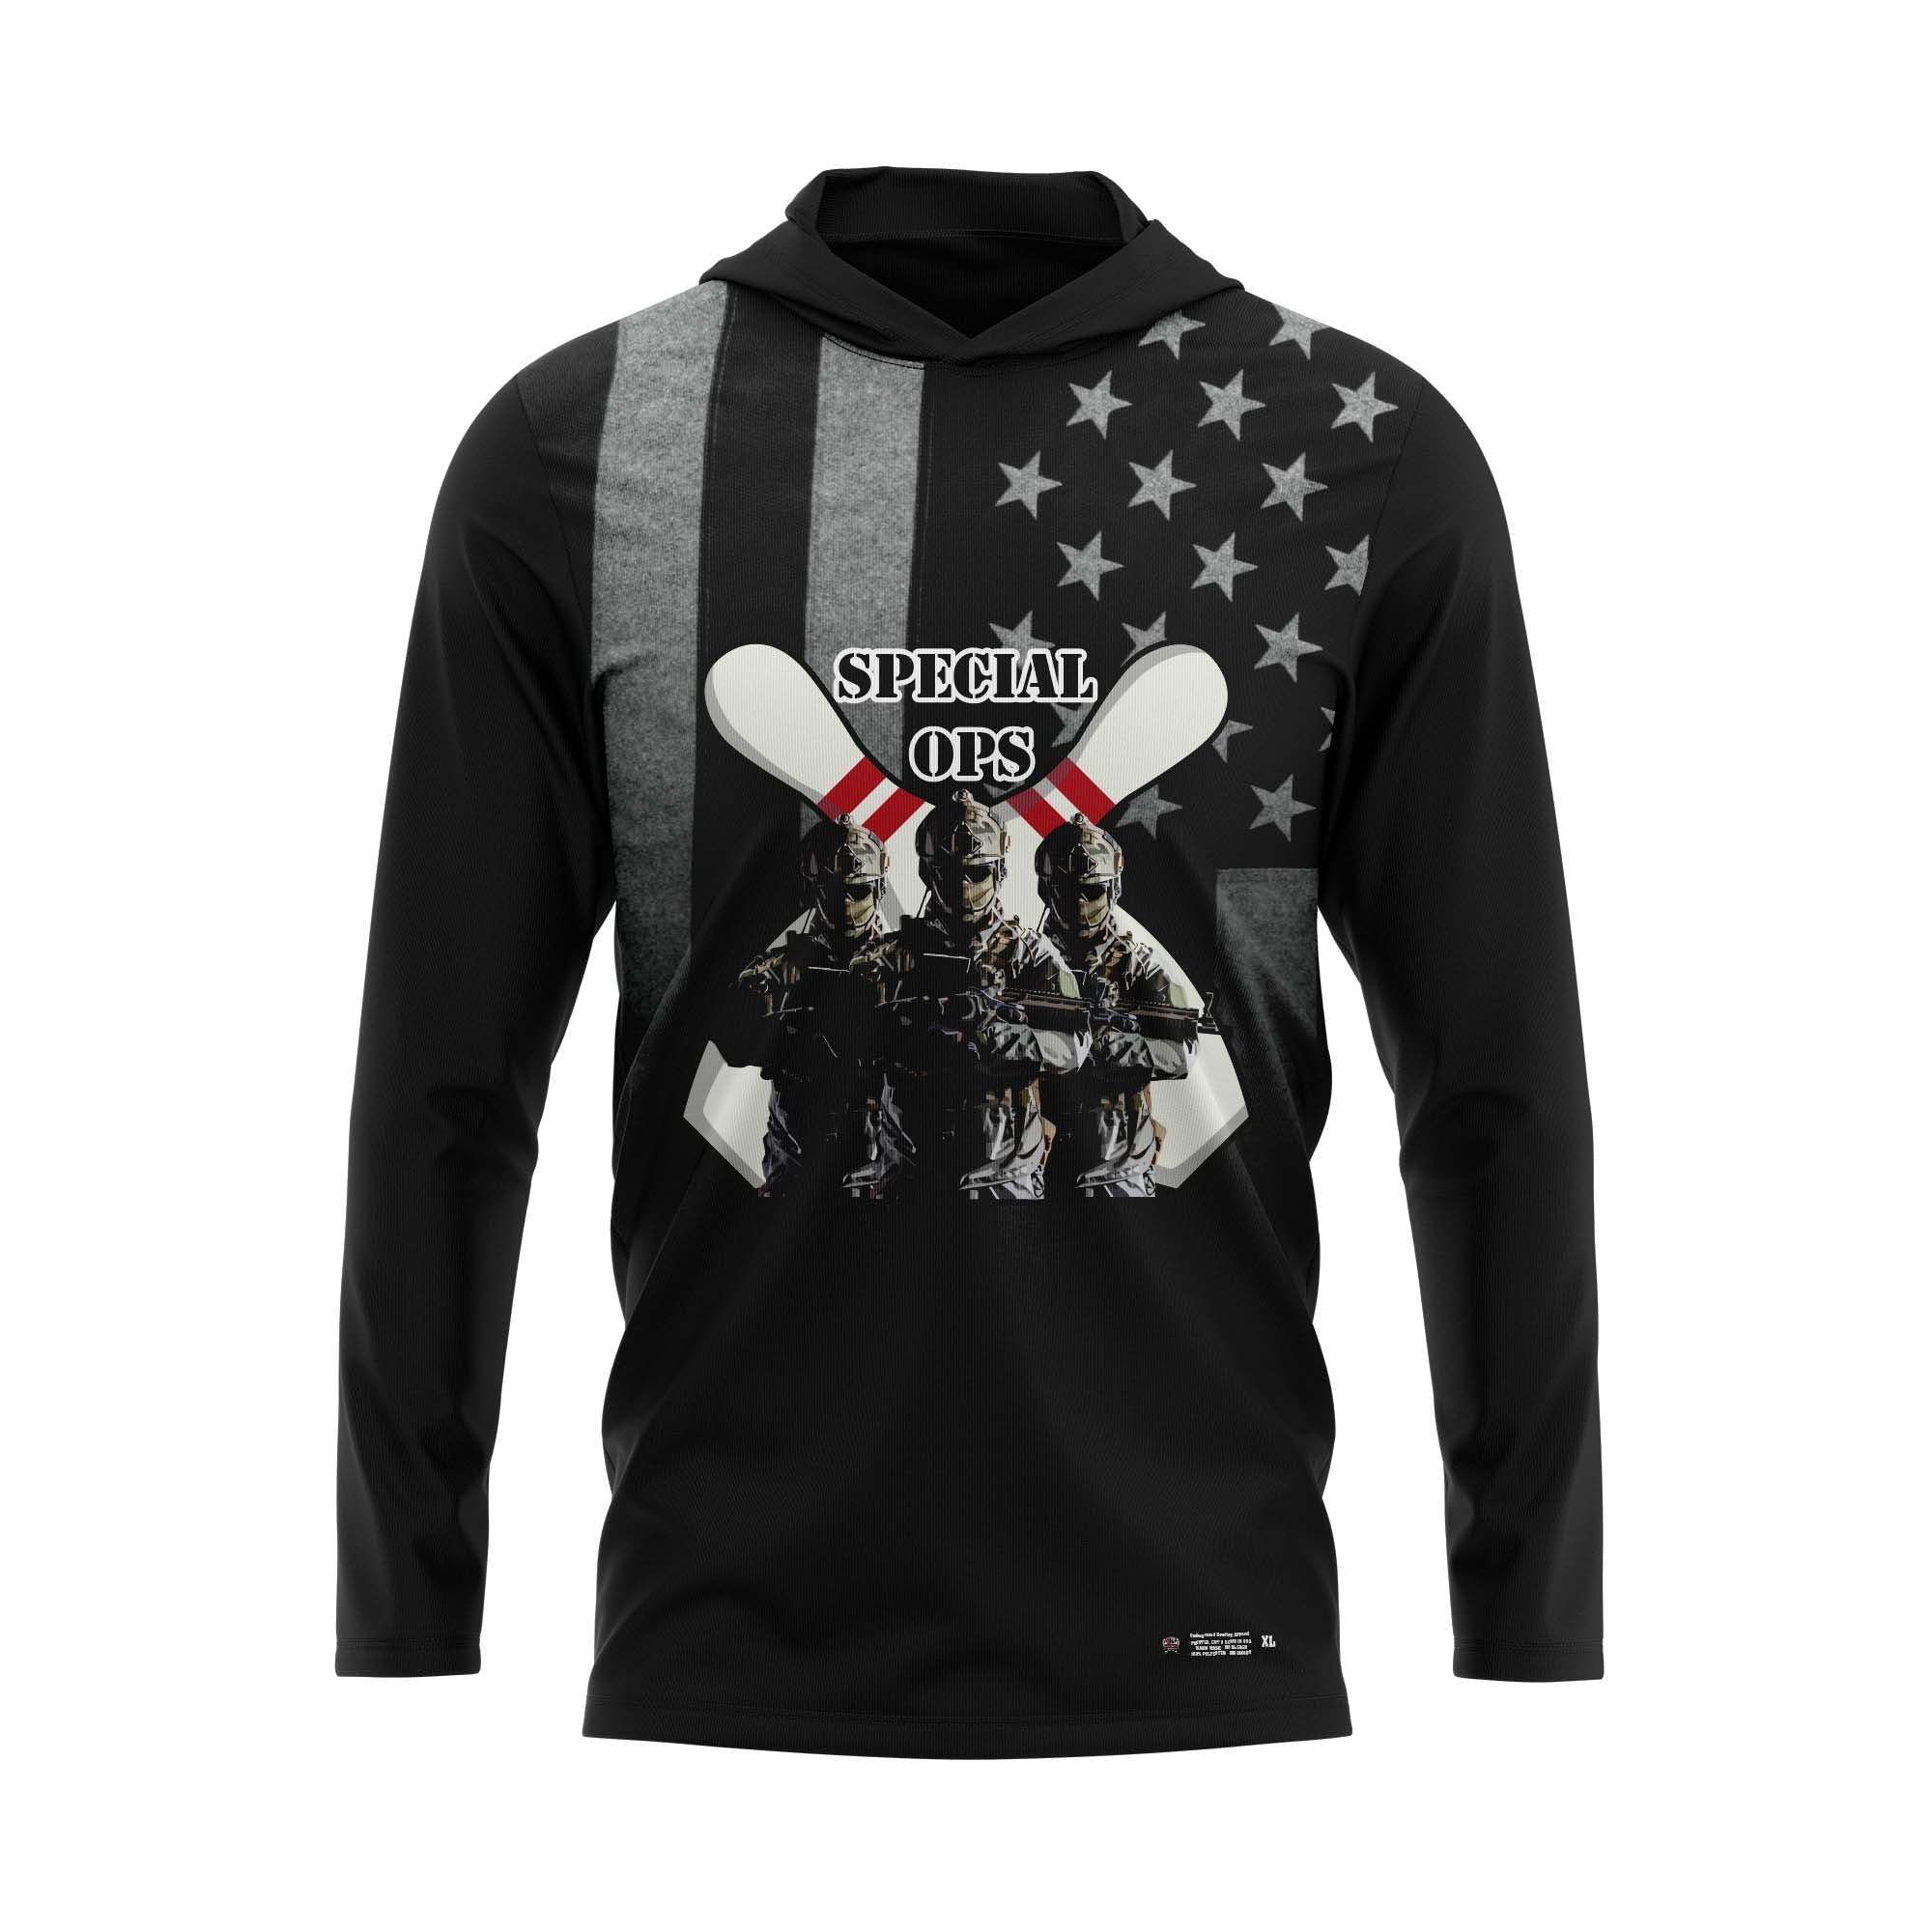 Special Ops Flag Jersey